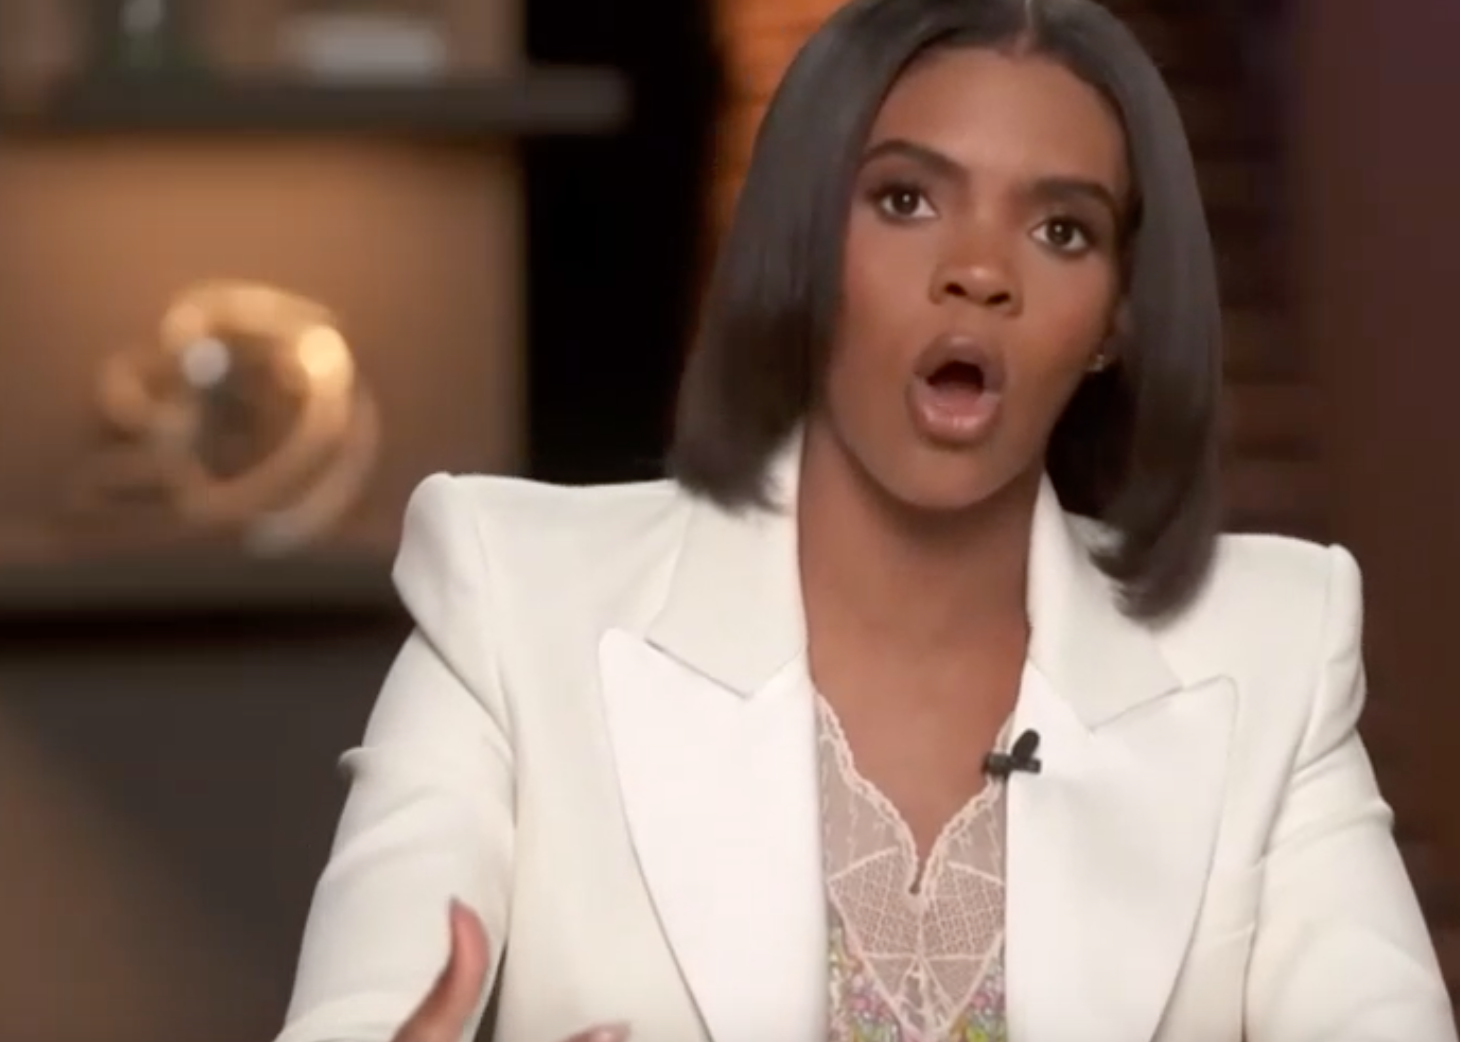 Candace Owens suspended from YouTube over hateful anti-LGBTQ+ content